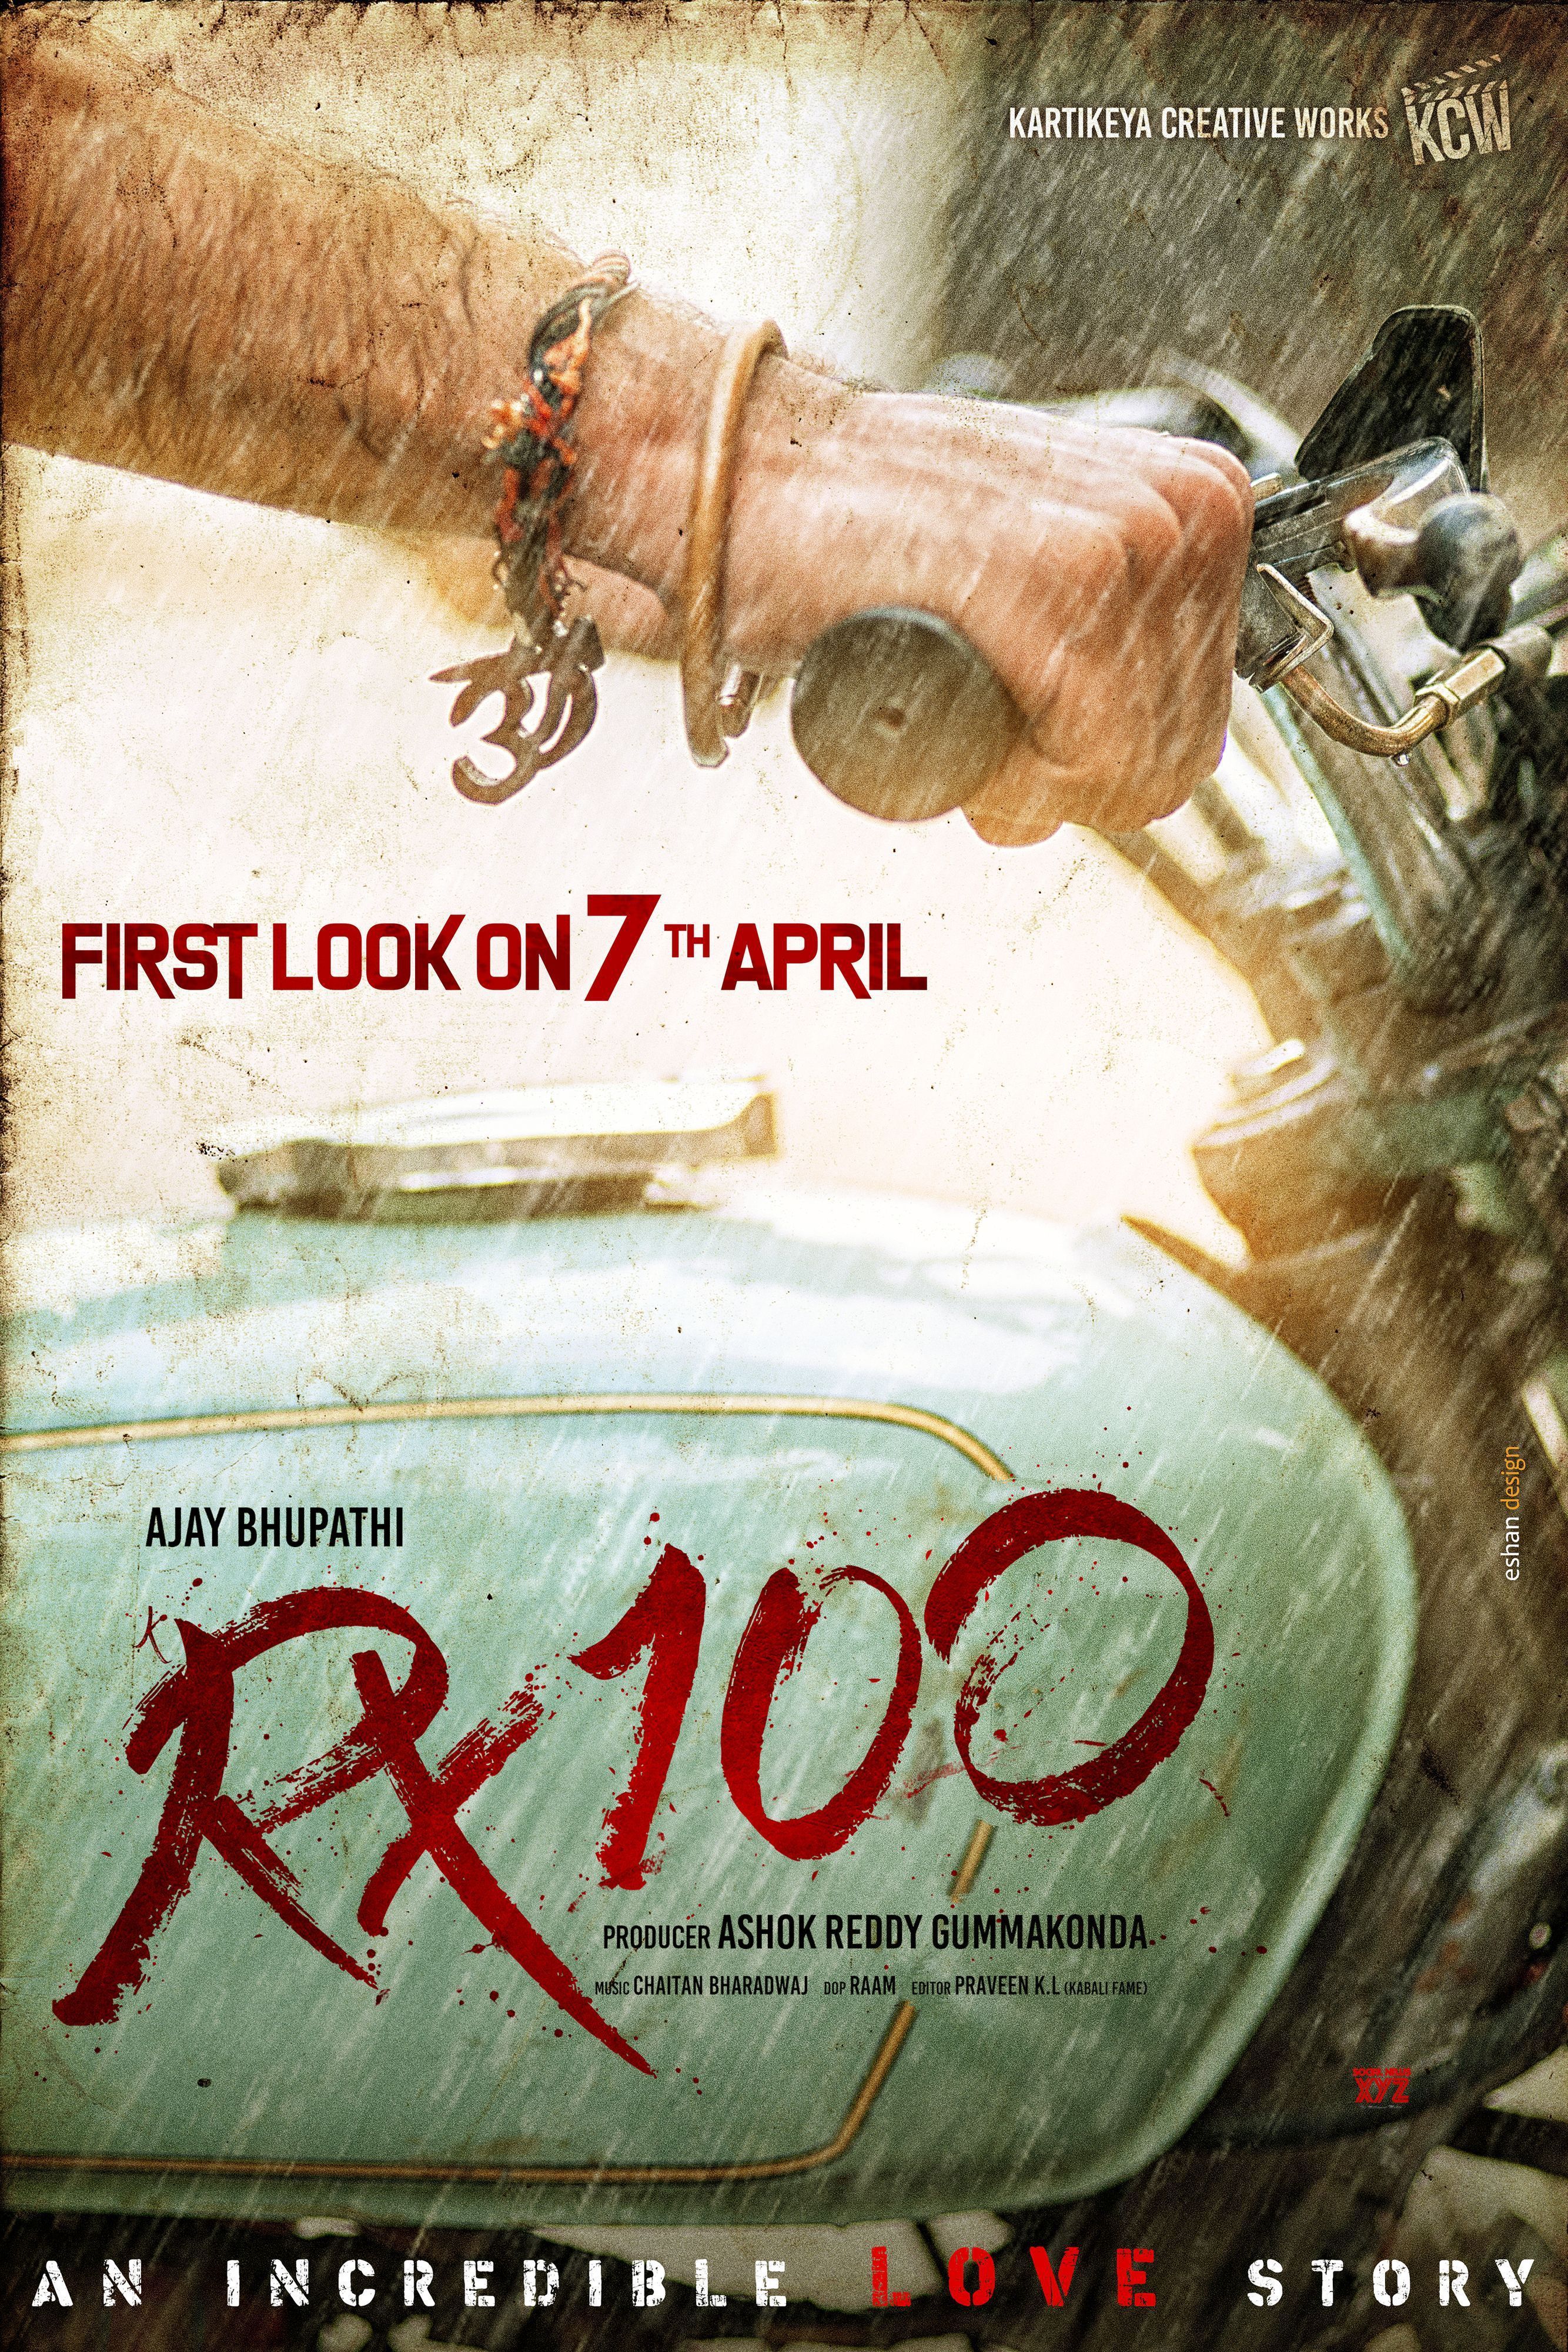 RX 100 Movie First Look On April 7th News XYZ. Full movies, Full movies online, Full movies online free